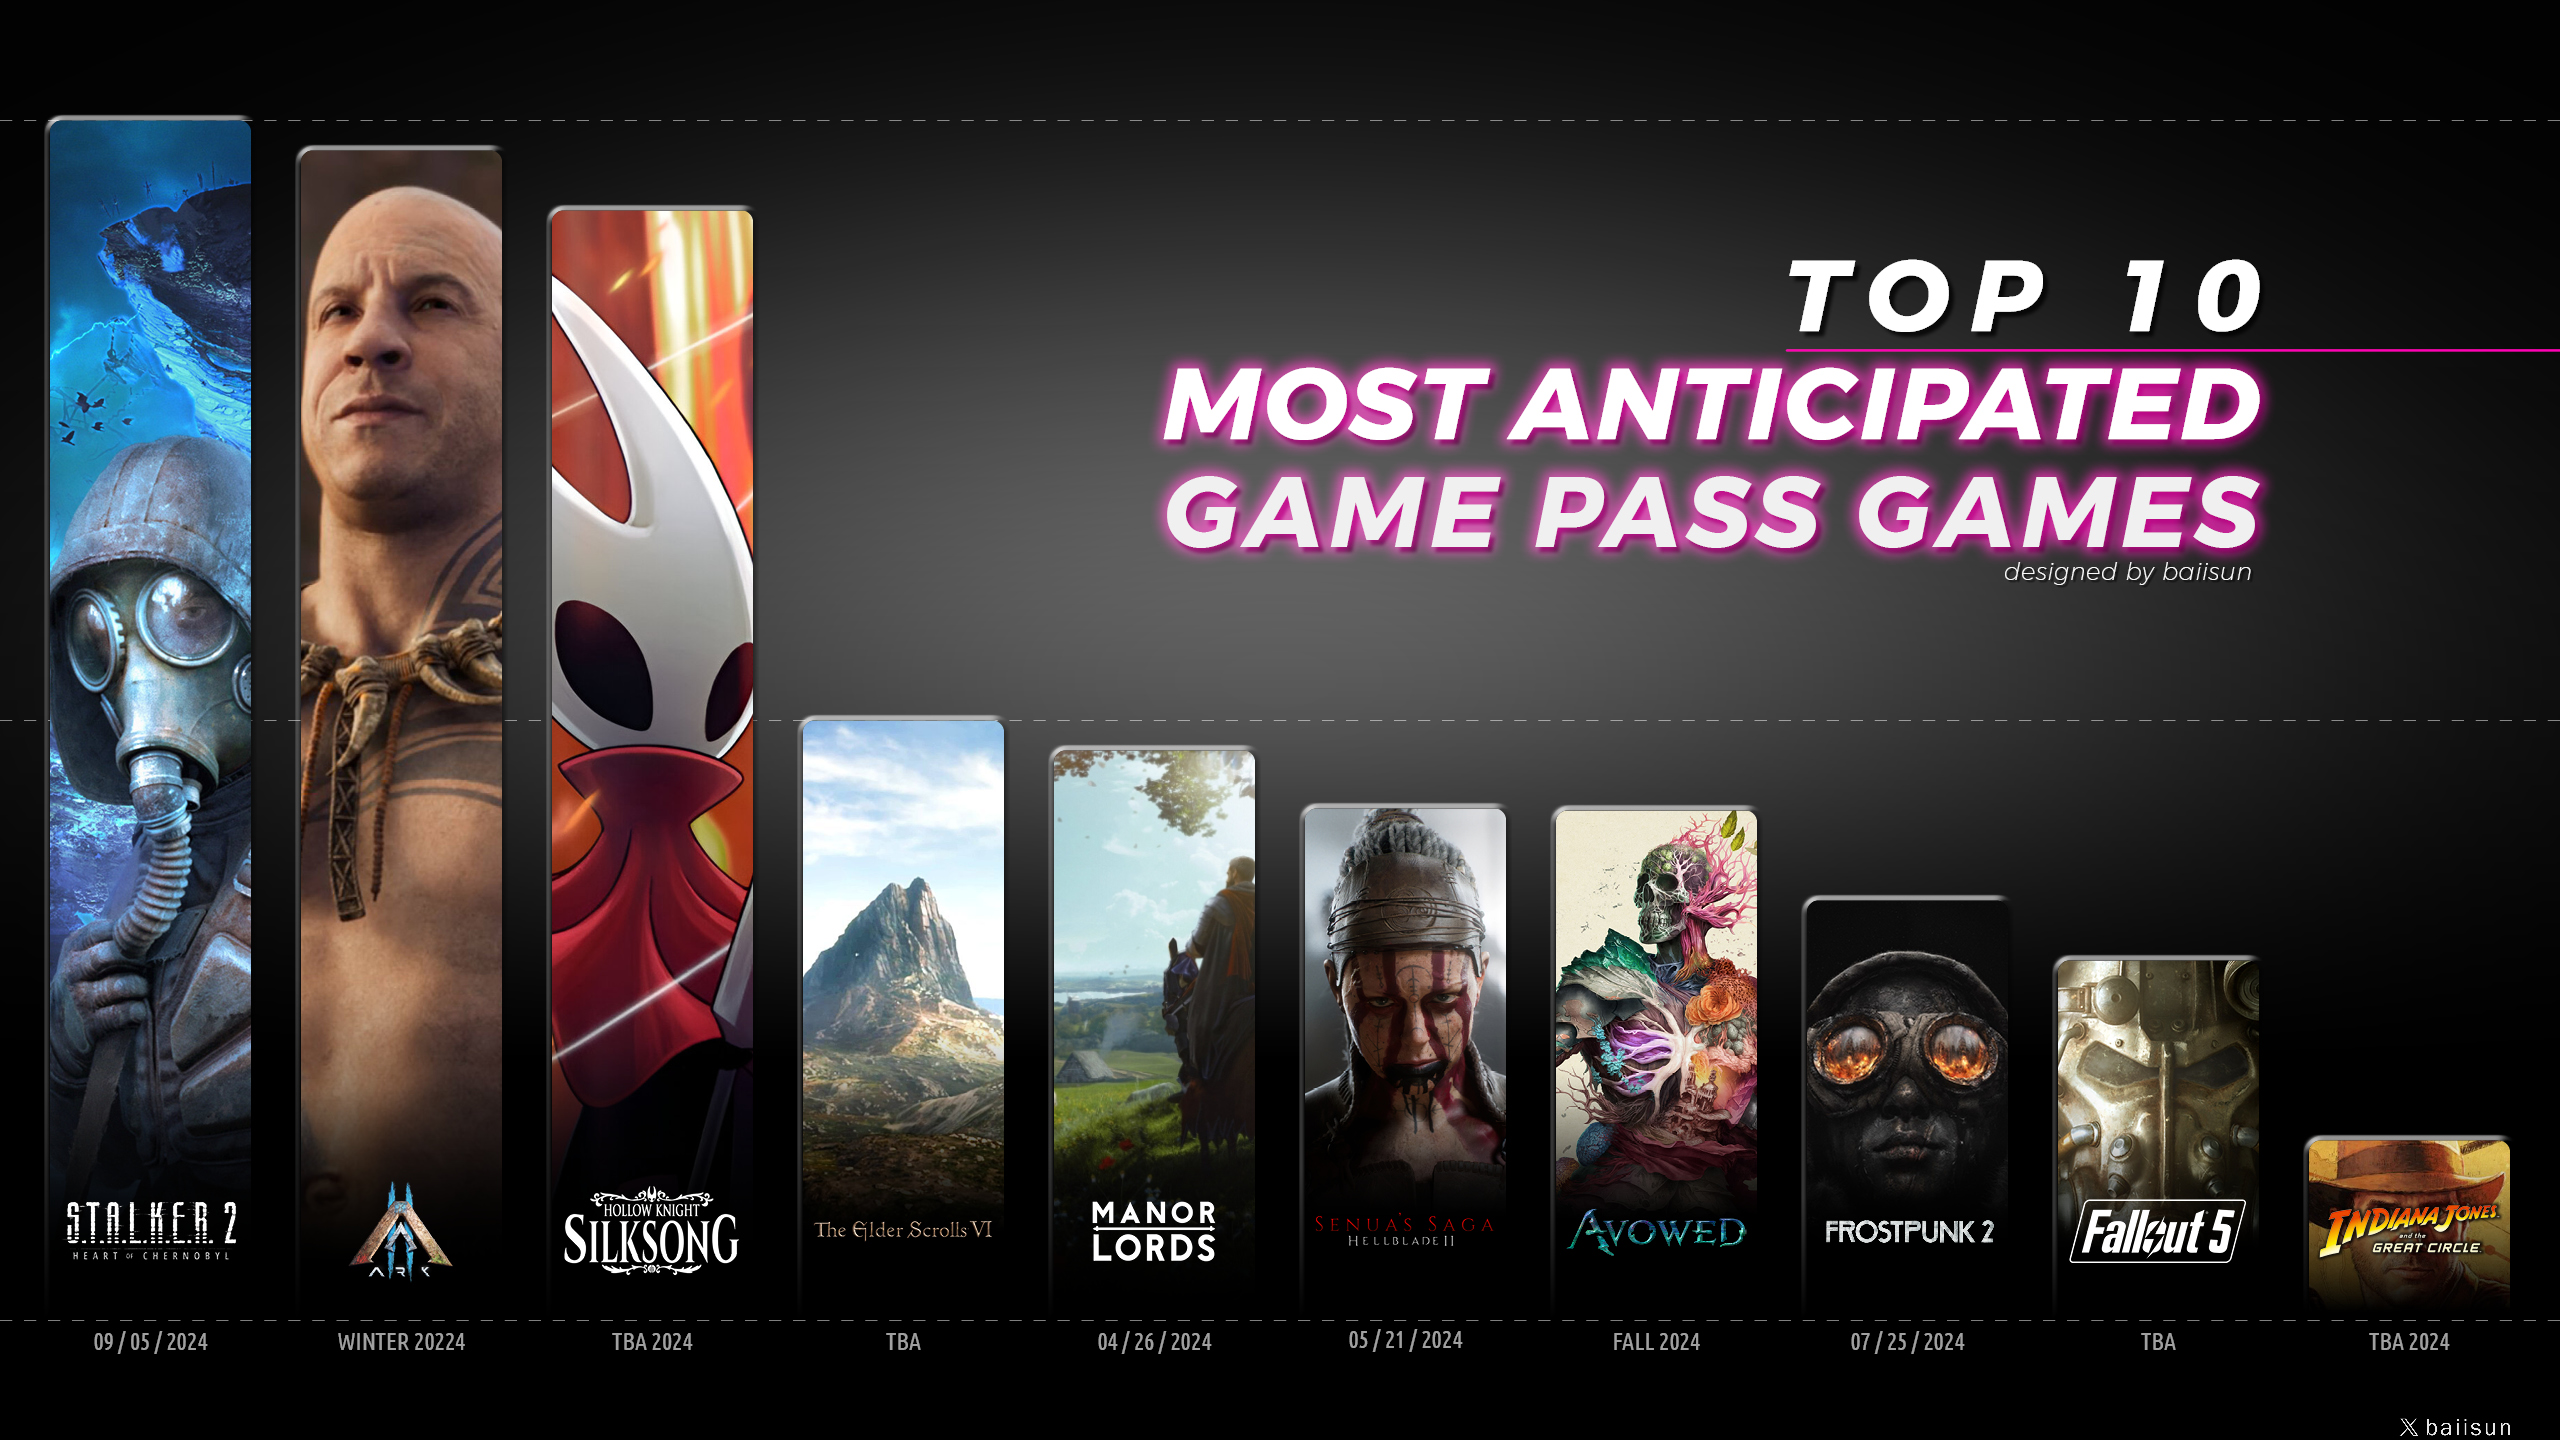 Top 10 Most Anticipated Game Pass Games according to Google Trends data